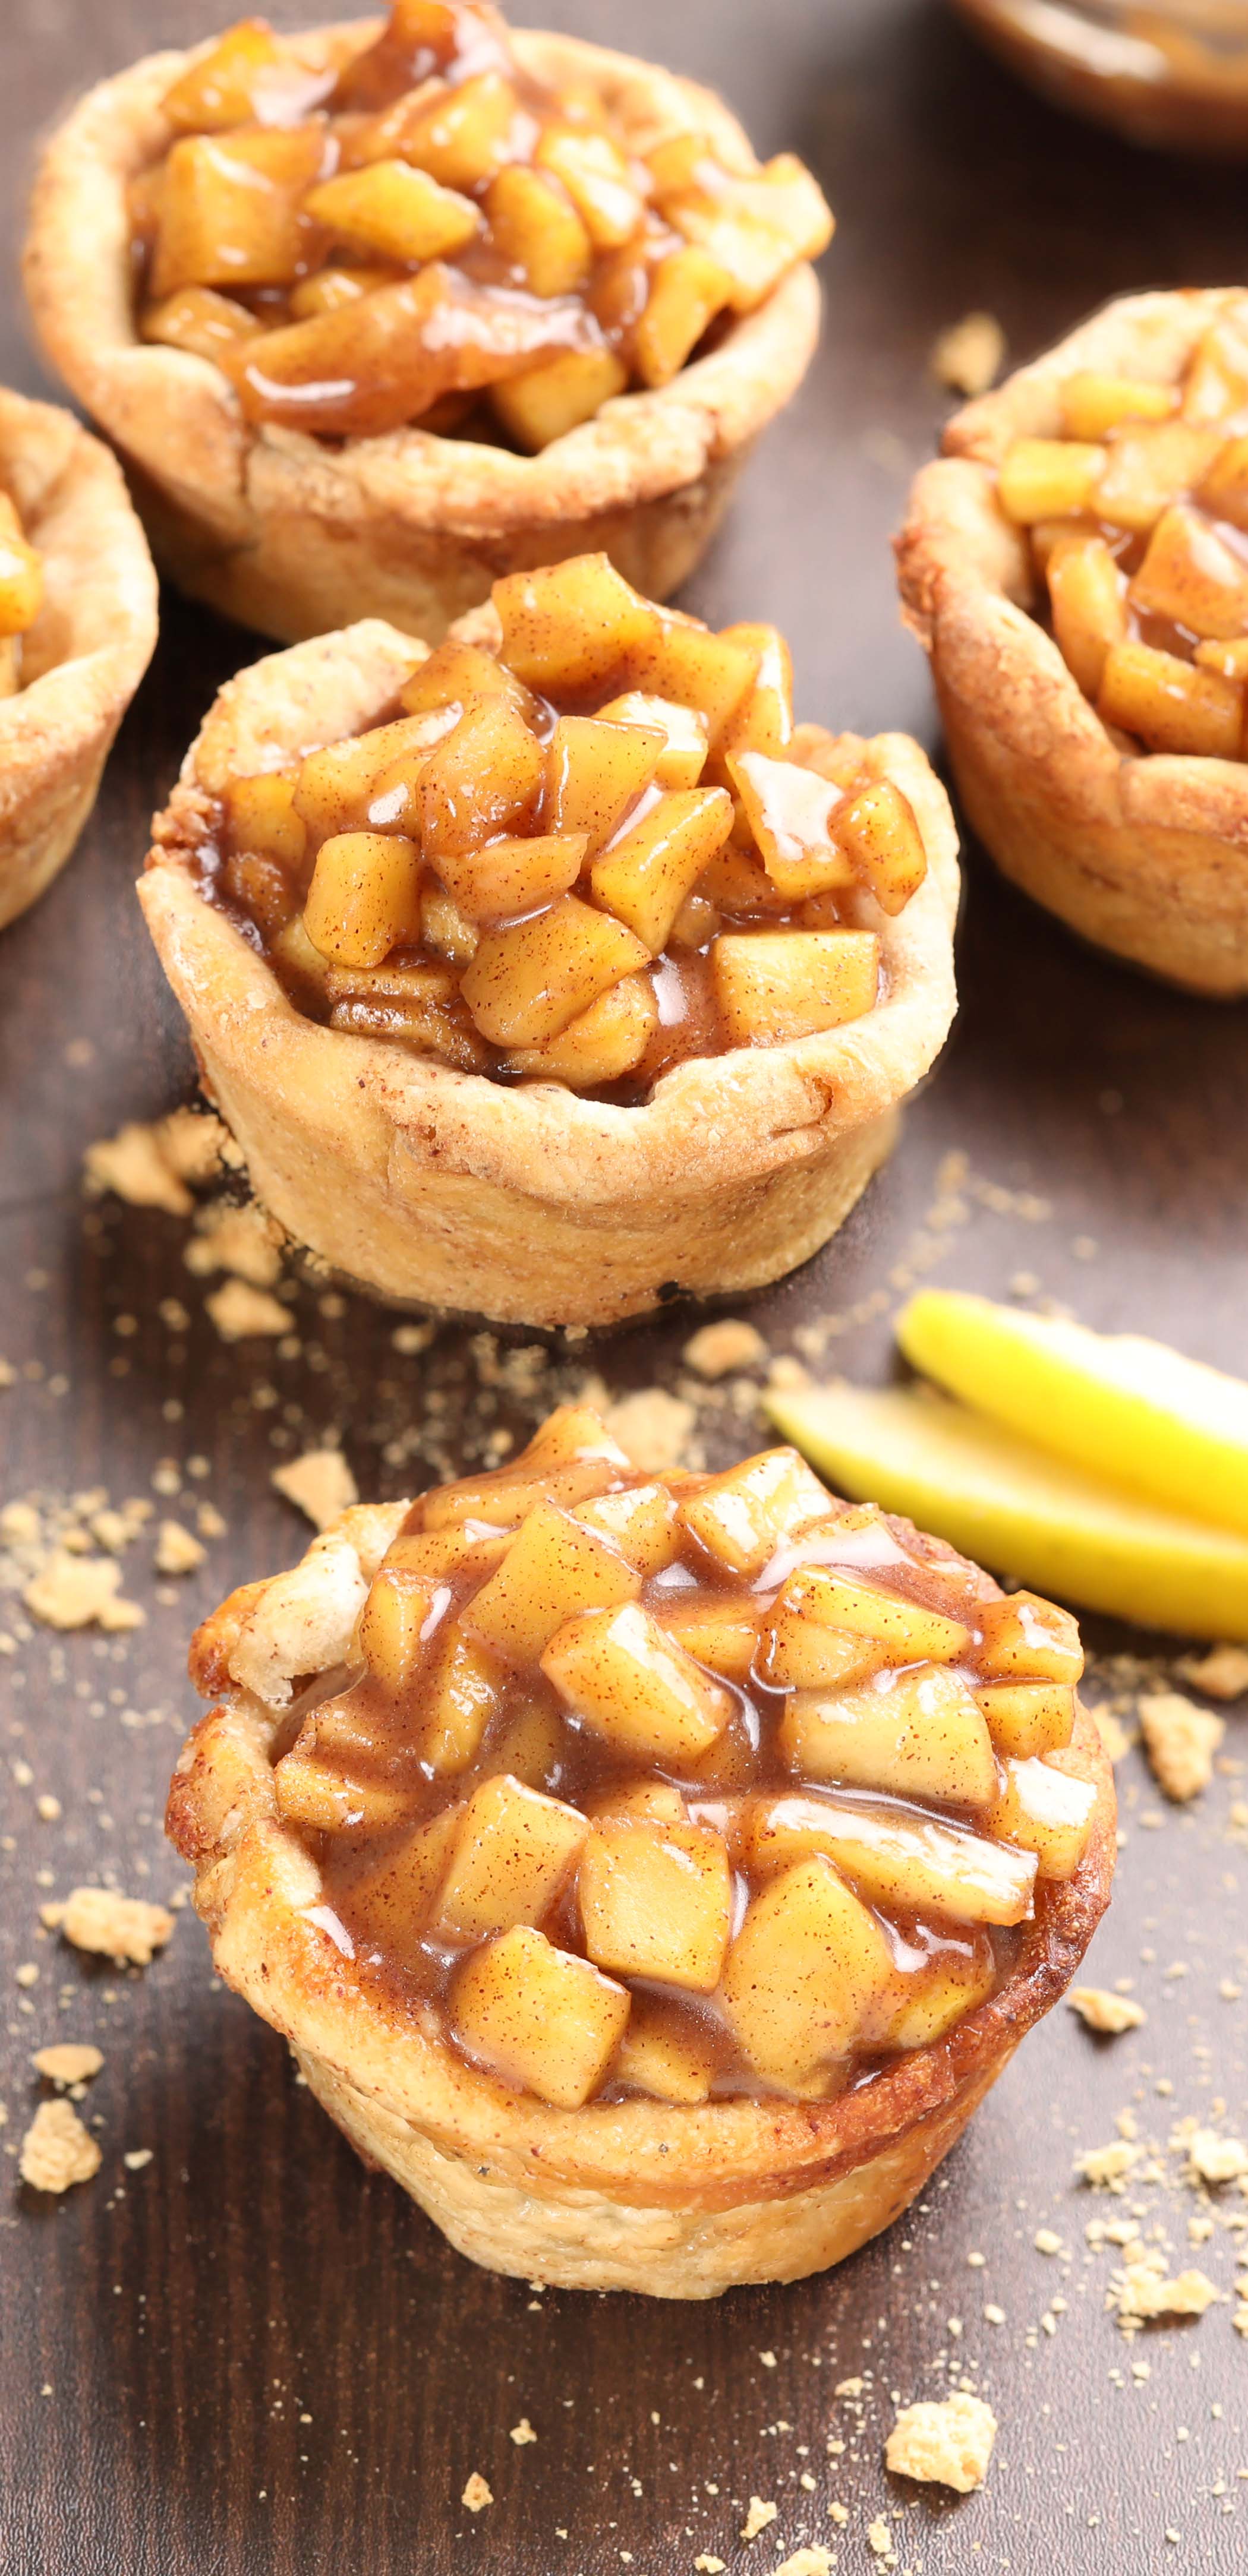 Apple Pie Bites - Bite-size cinnamon roll cups that are filled with warm spiced apple pie filling and crumbly topping. The ultimate fall dessert!